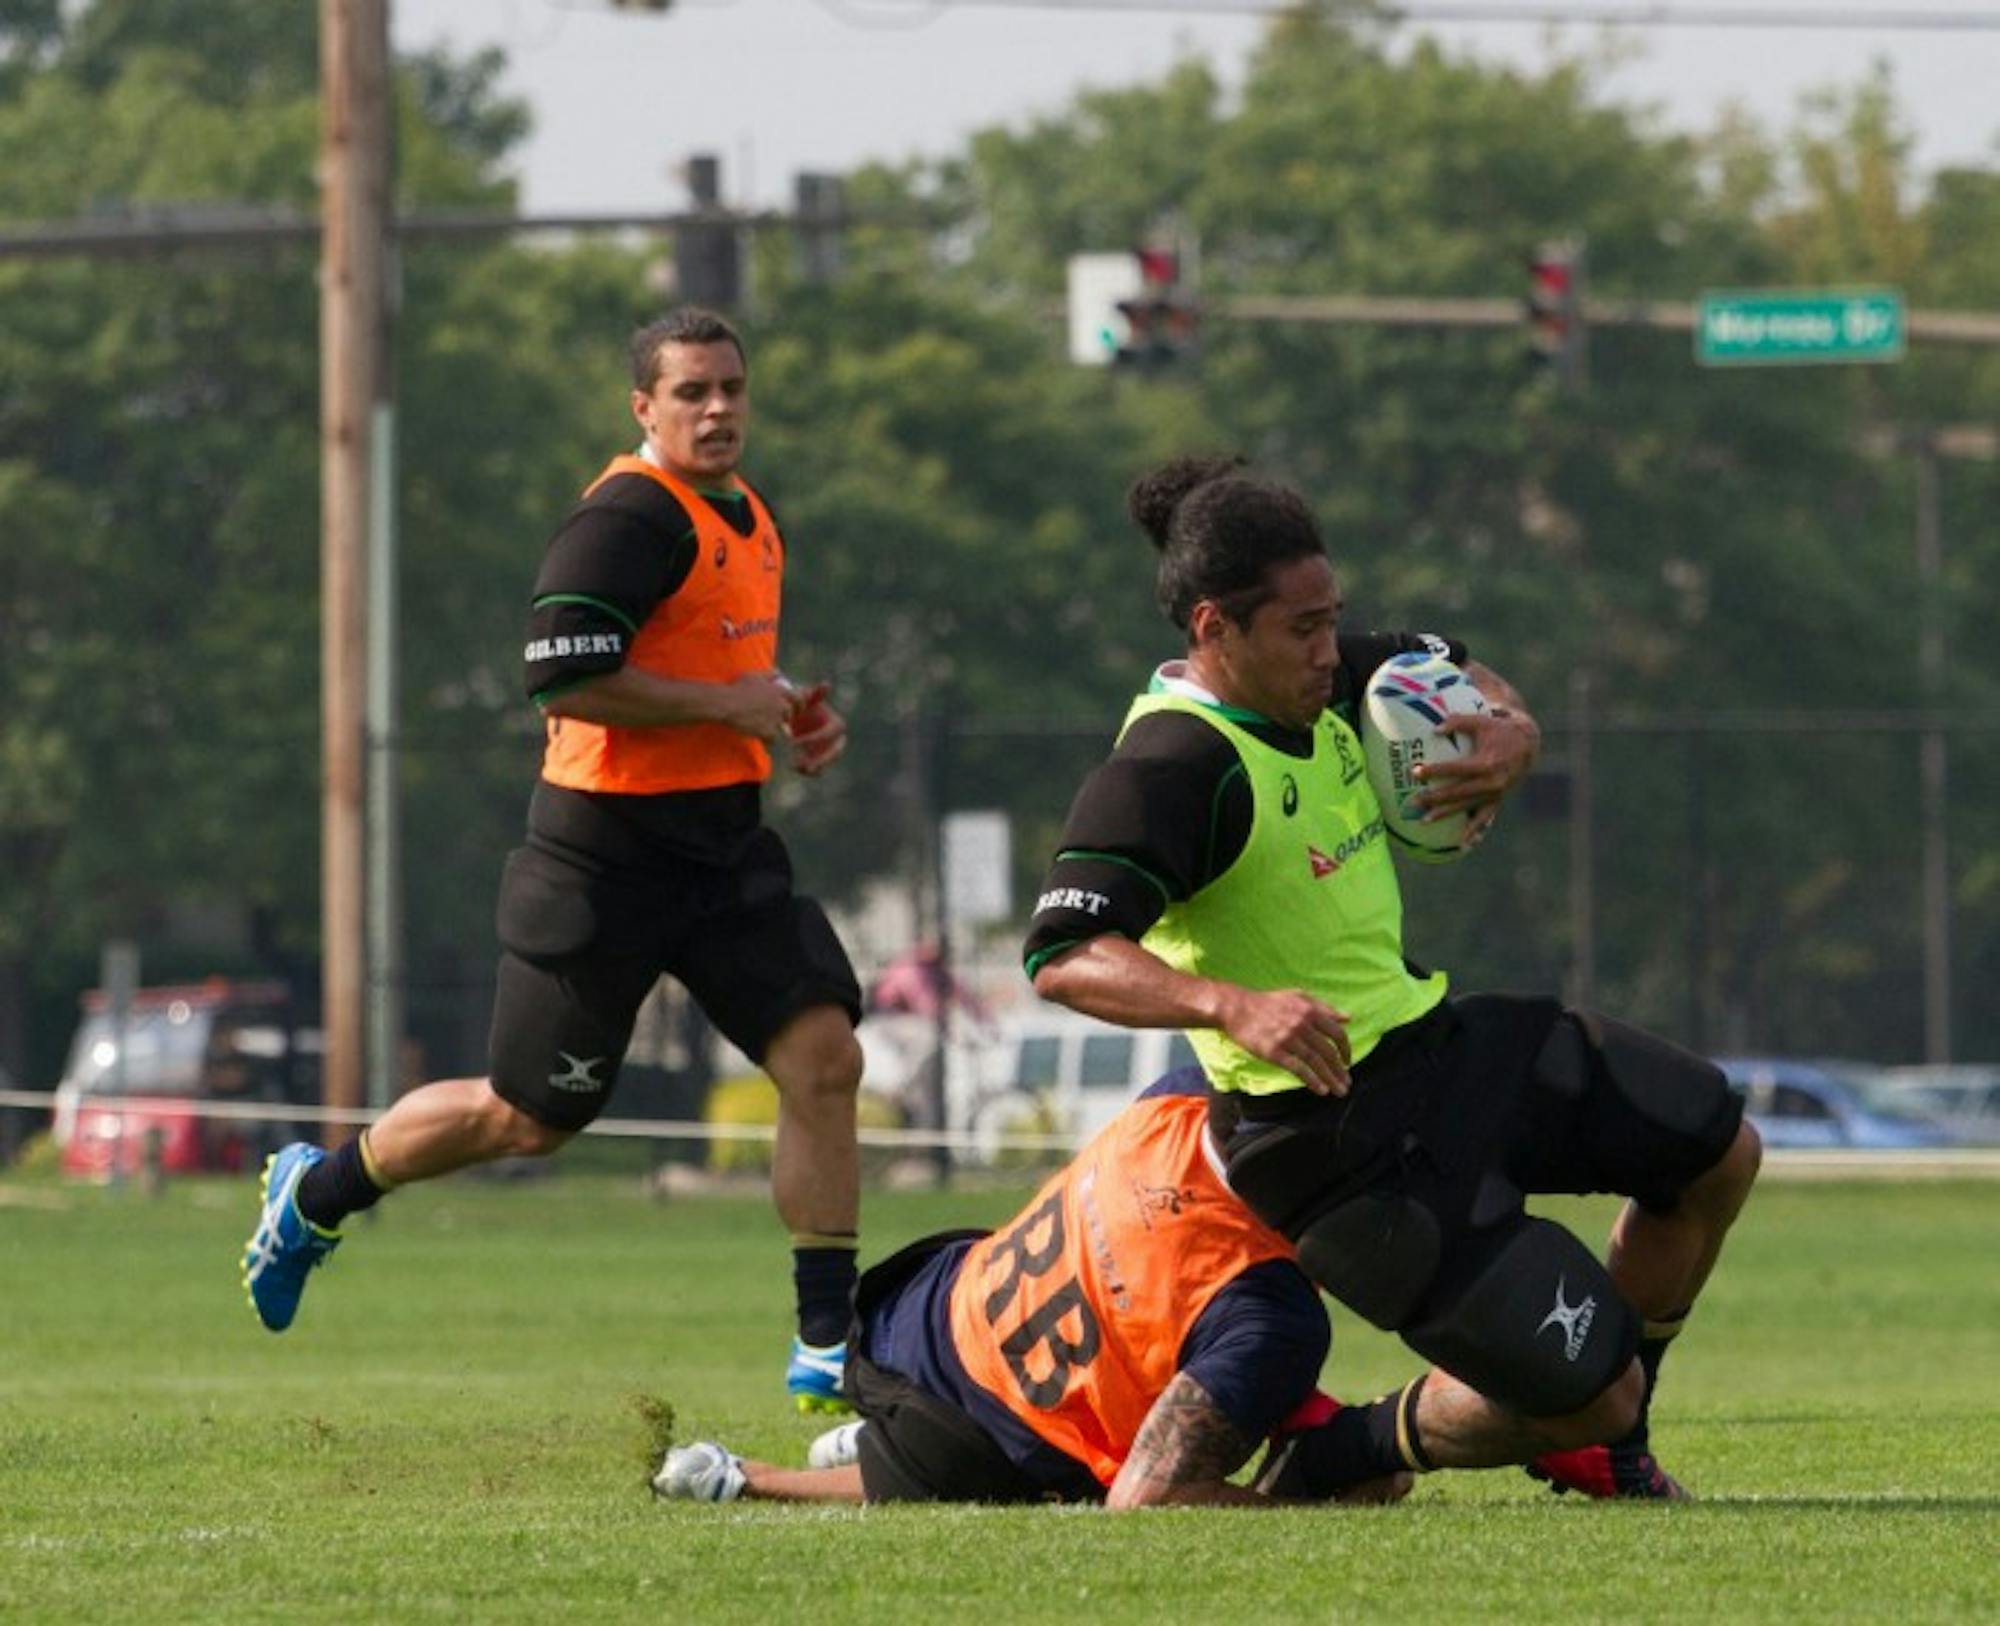 Wallabies winger Joe Tomane slides after being taken down in a practice Sept. 1 at Stinson Rugby Field.